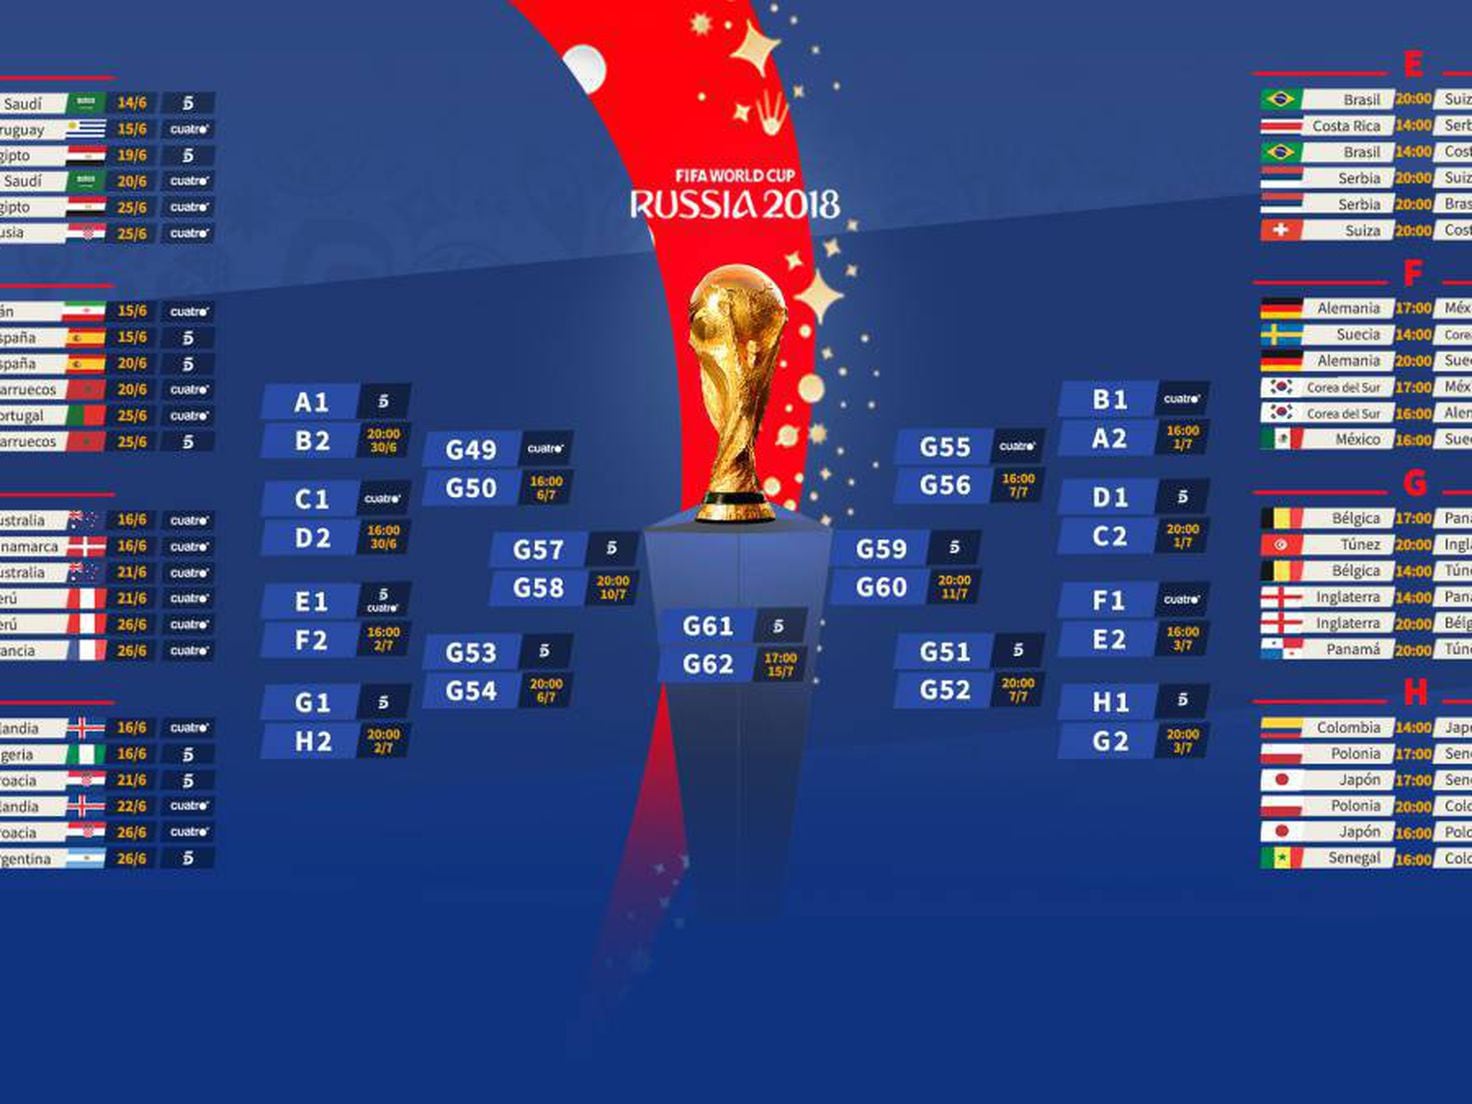 2022 World Cup: How are group stage tie-breakers determined? Rules explained